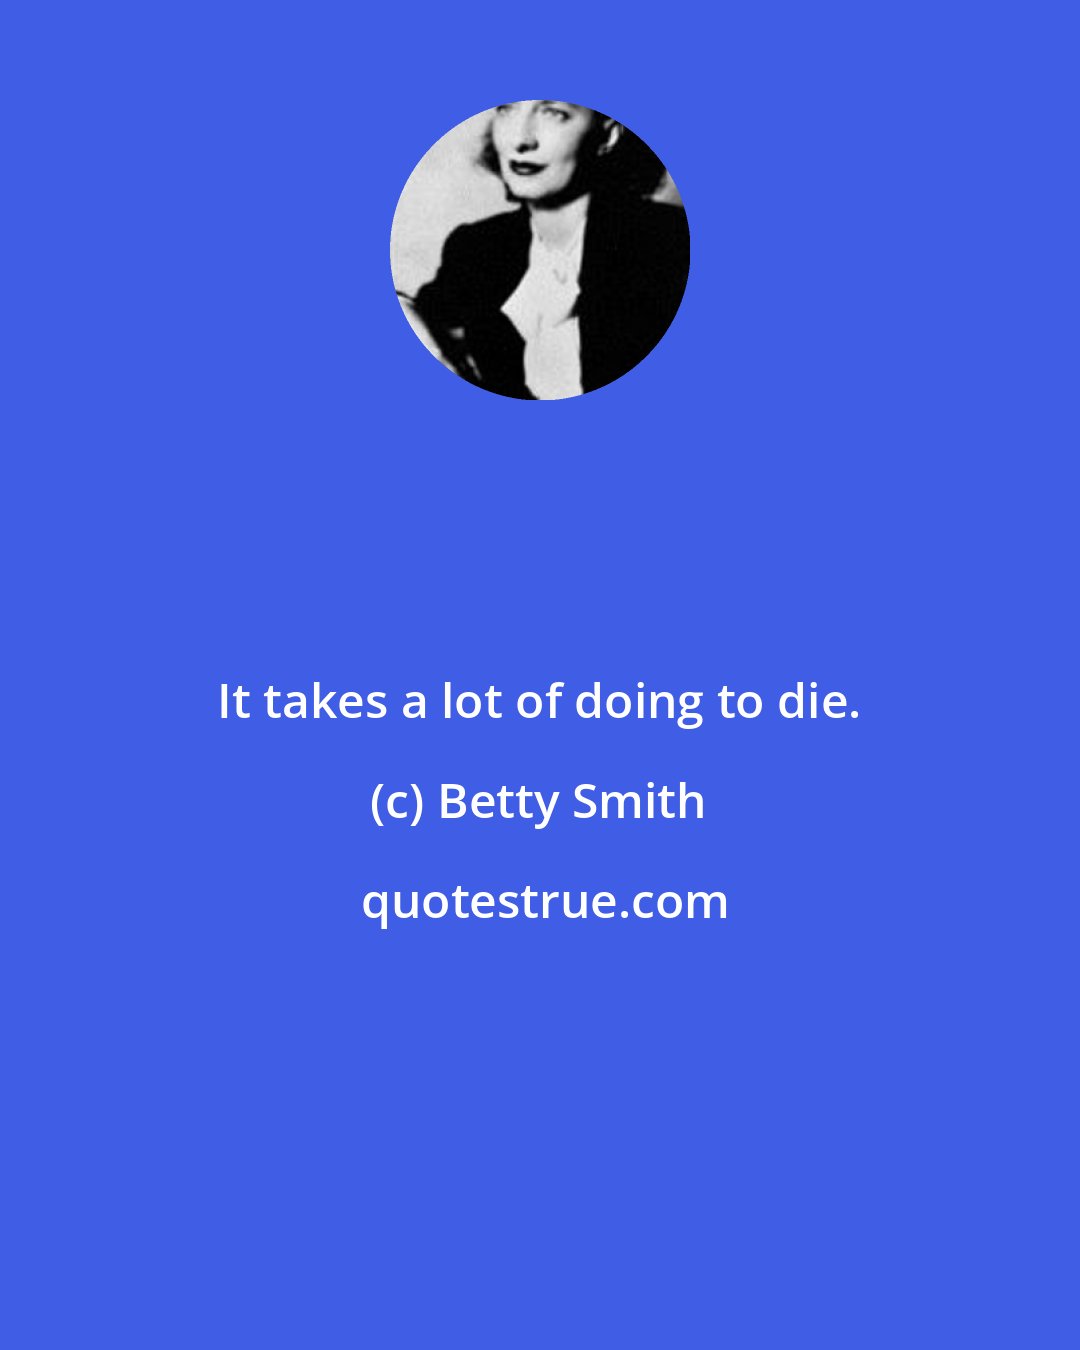 Betty Smith: It takes a lot of doing to die.